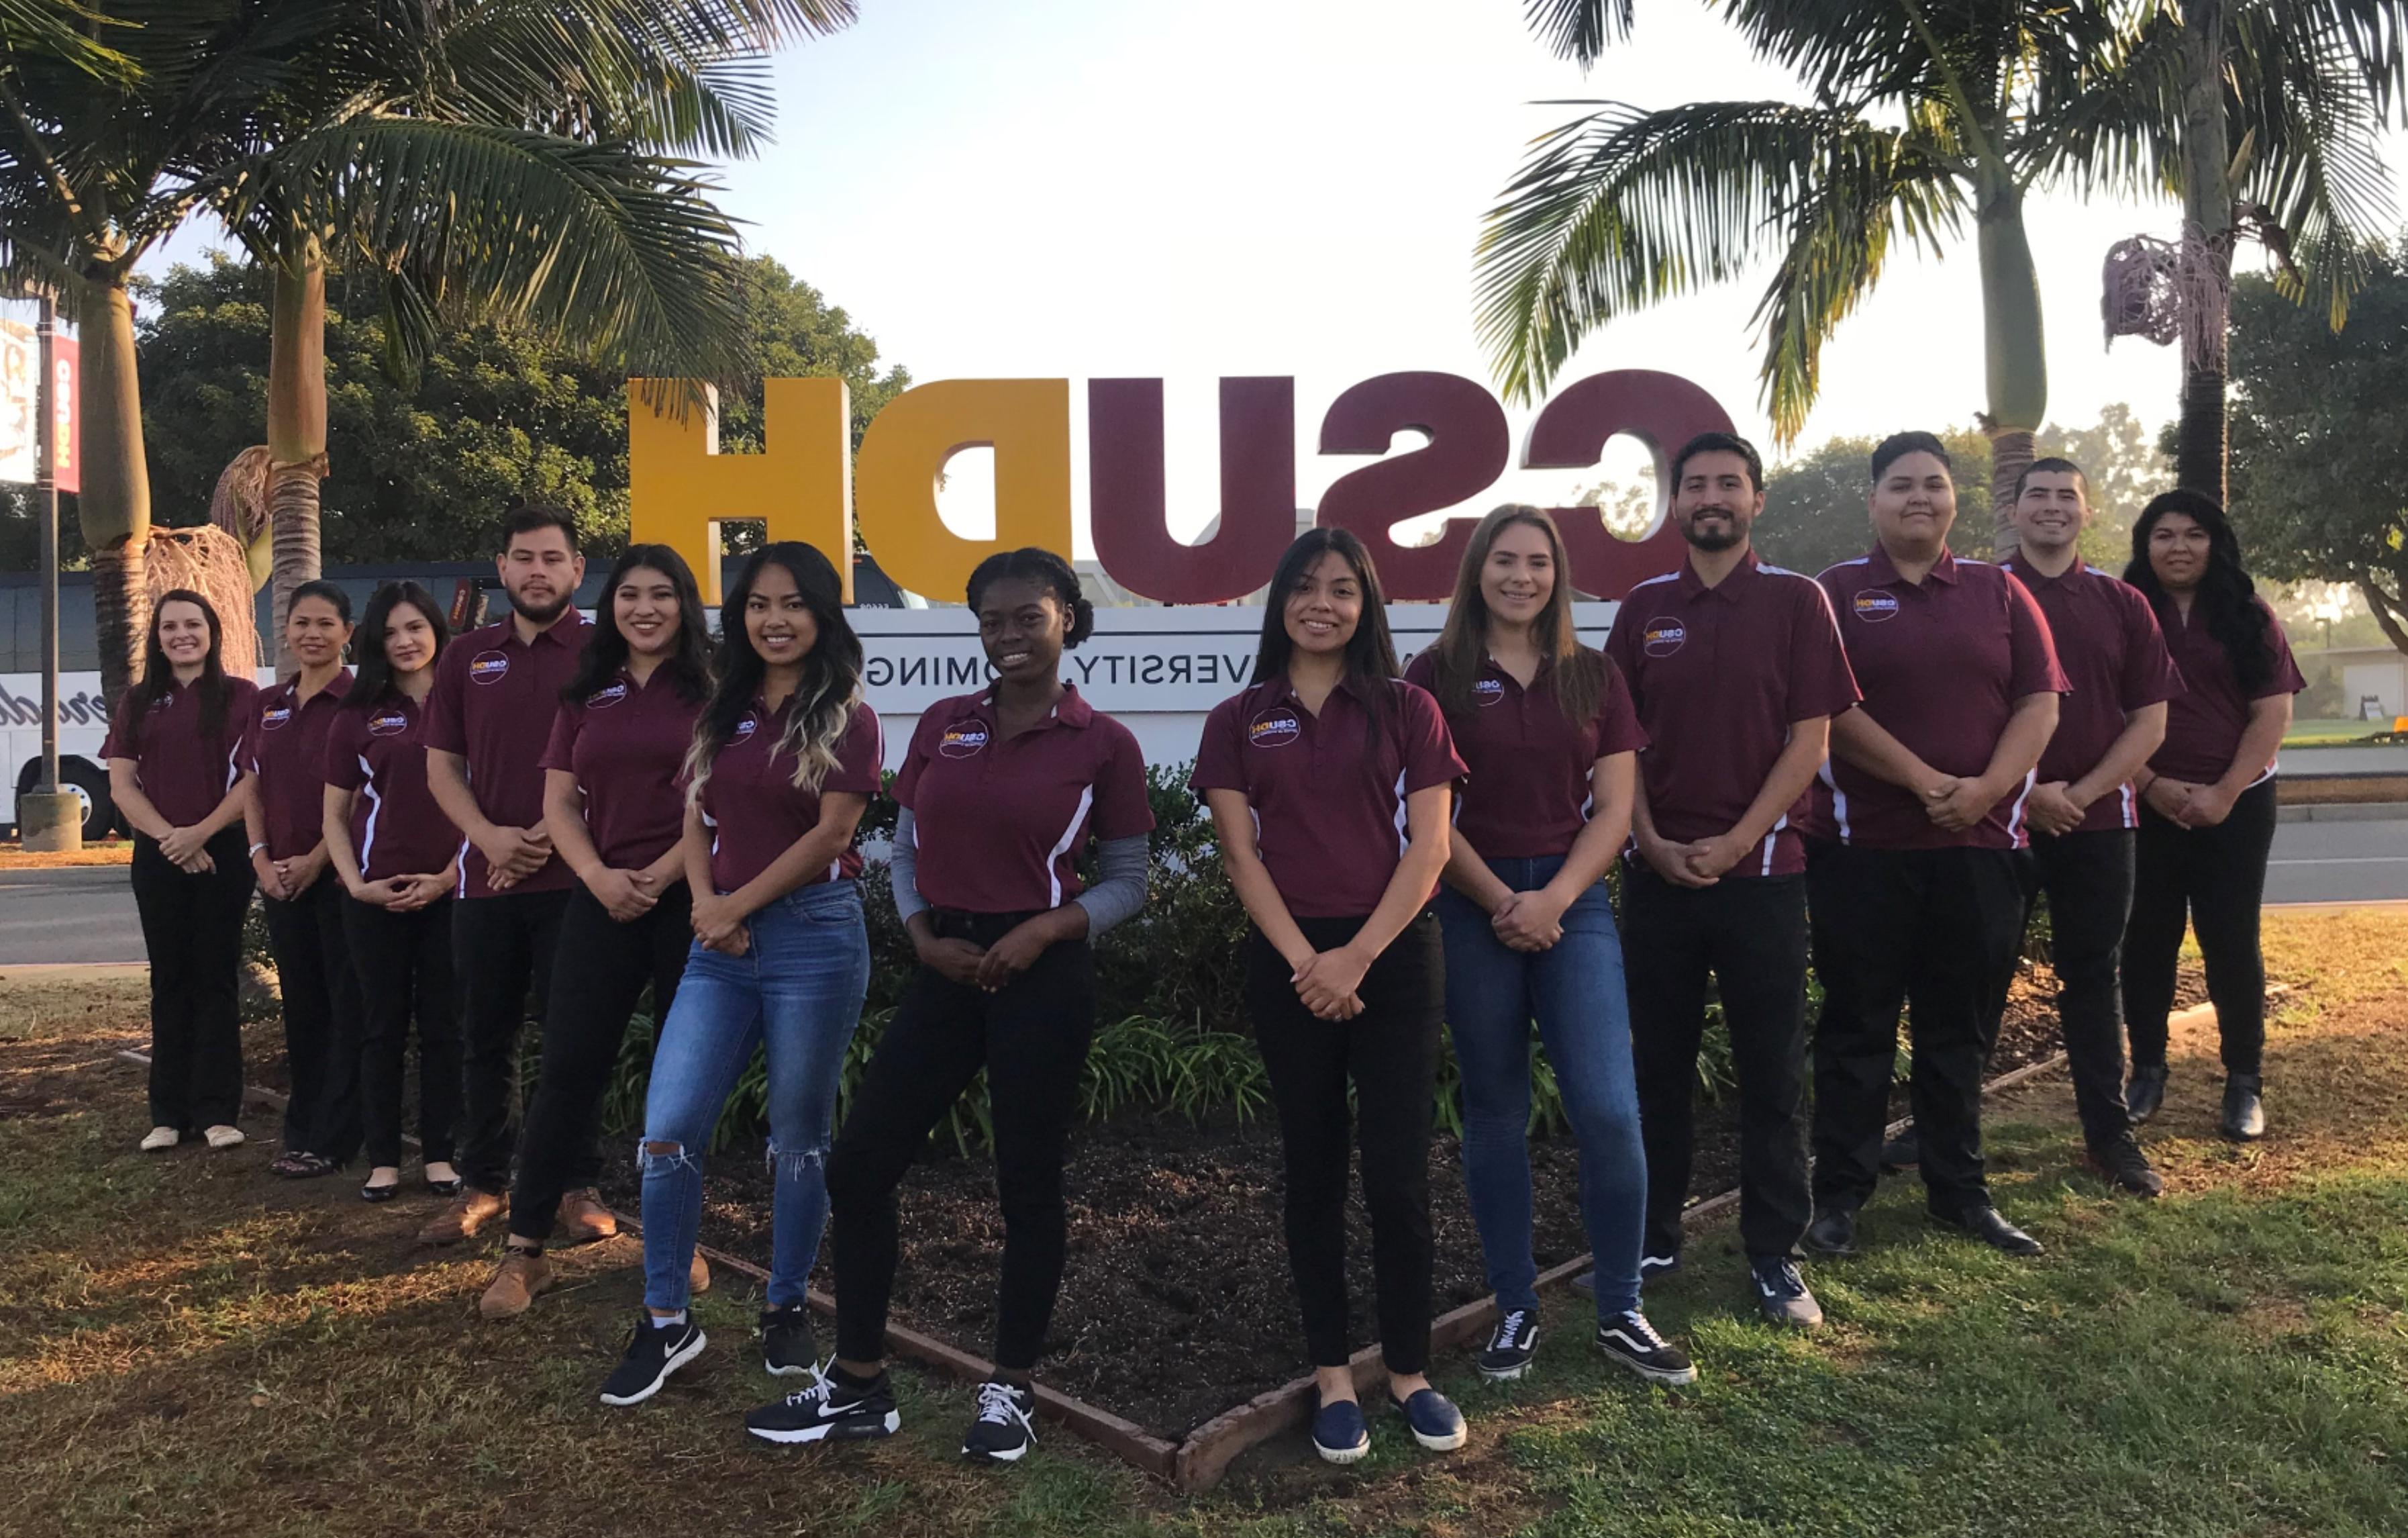 A picture of all staff members who work in the Office of Student Life standing in front of the large CSUDH sign on Victoria Street.